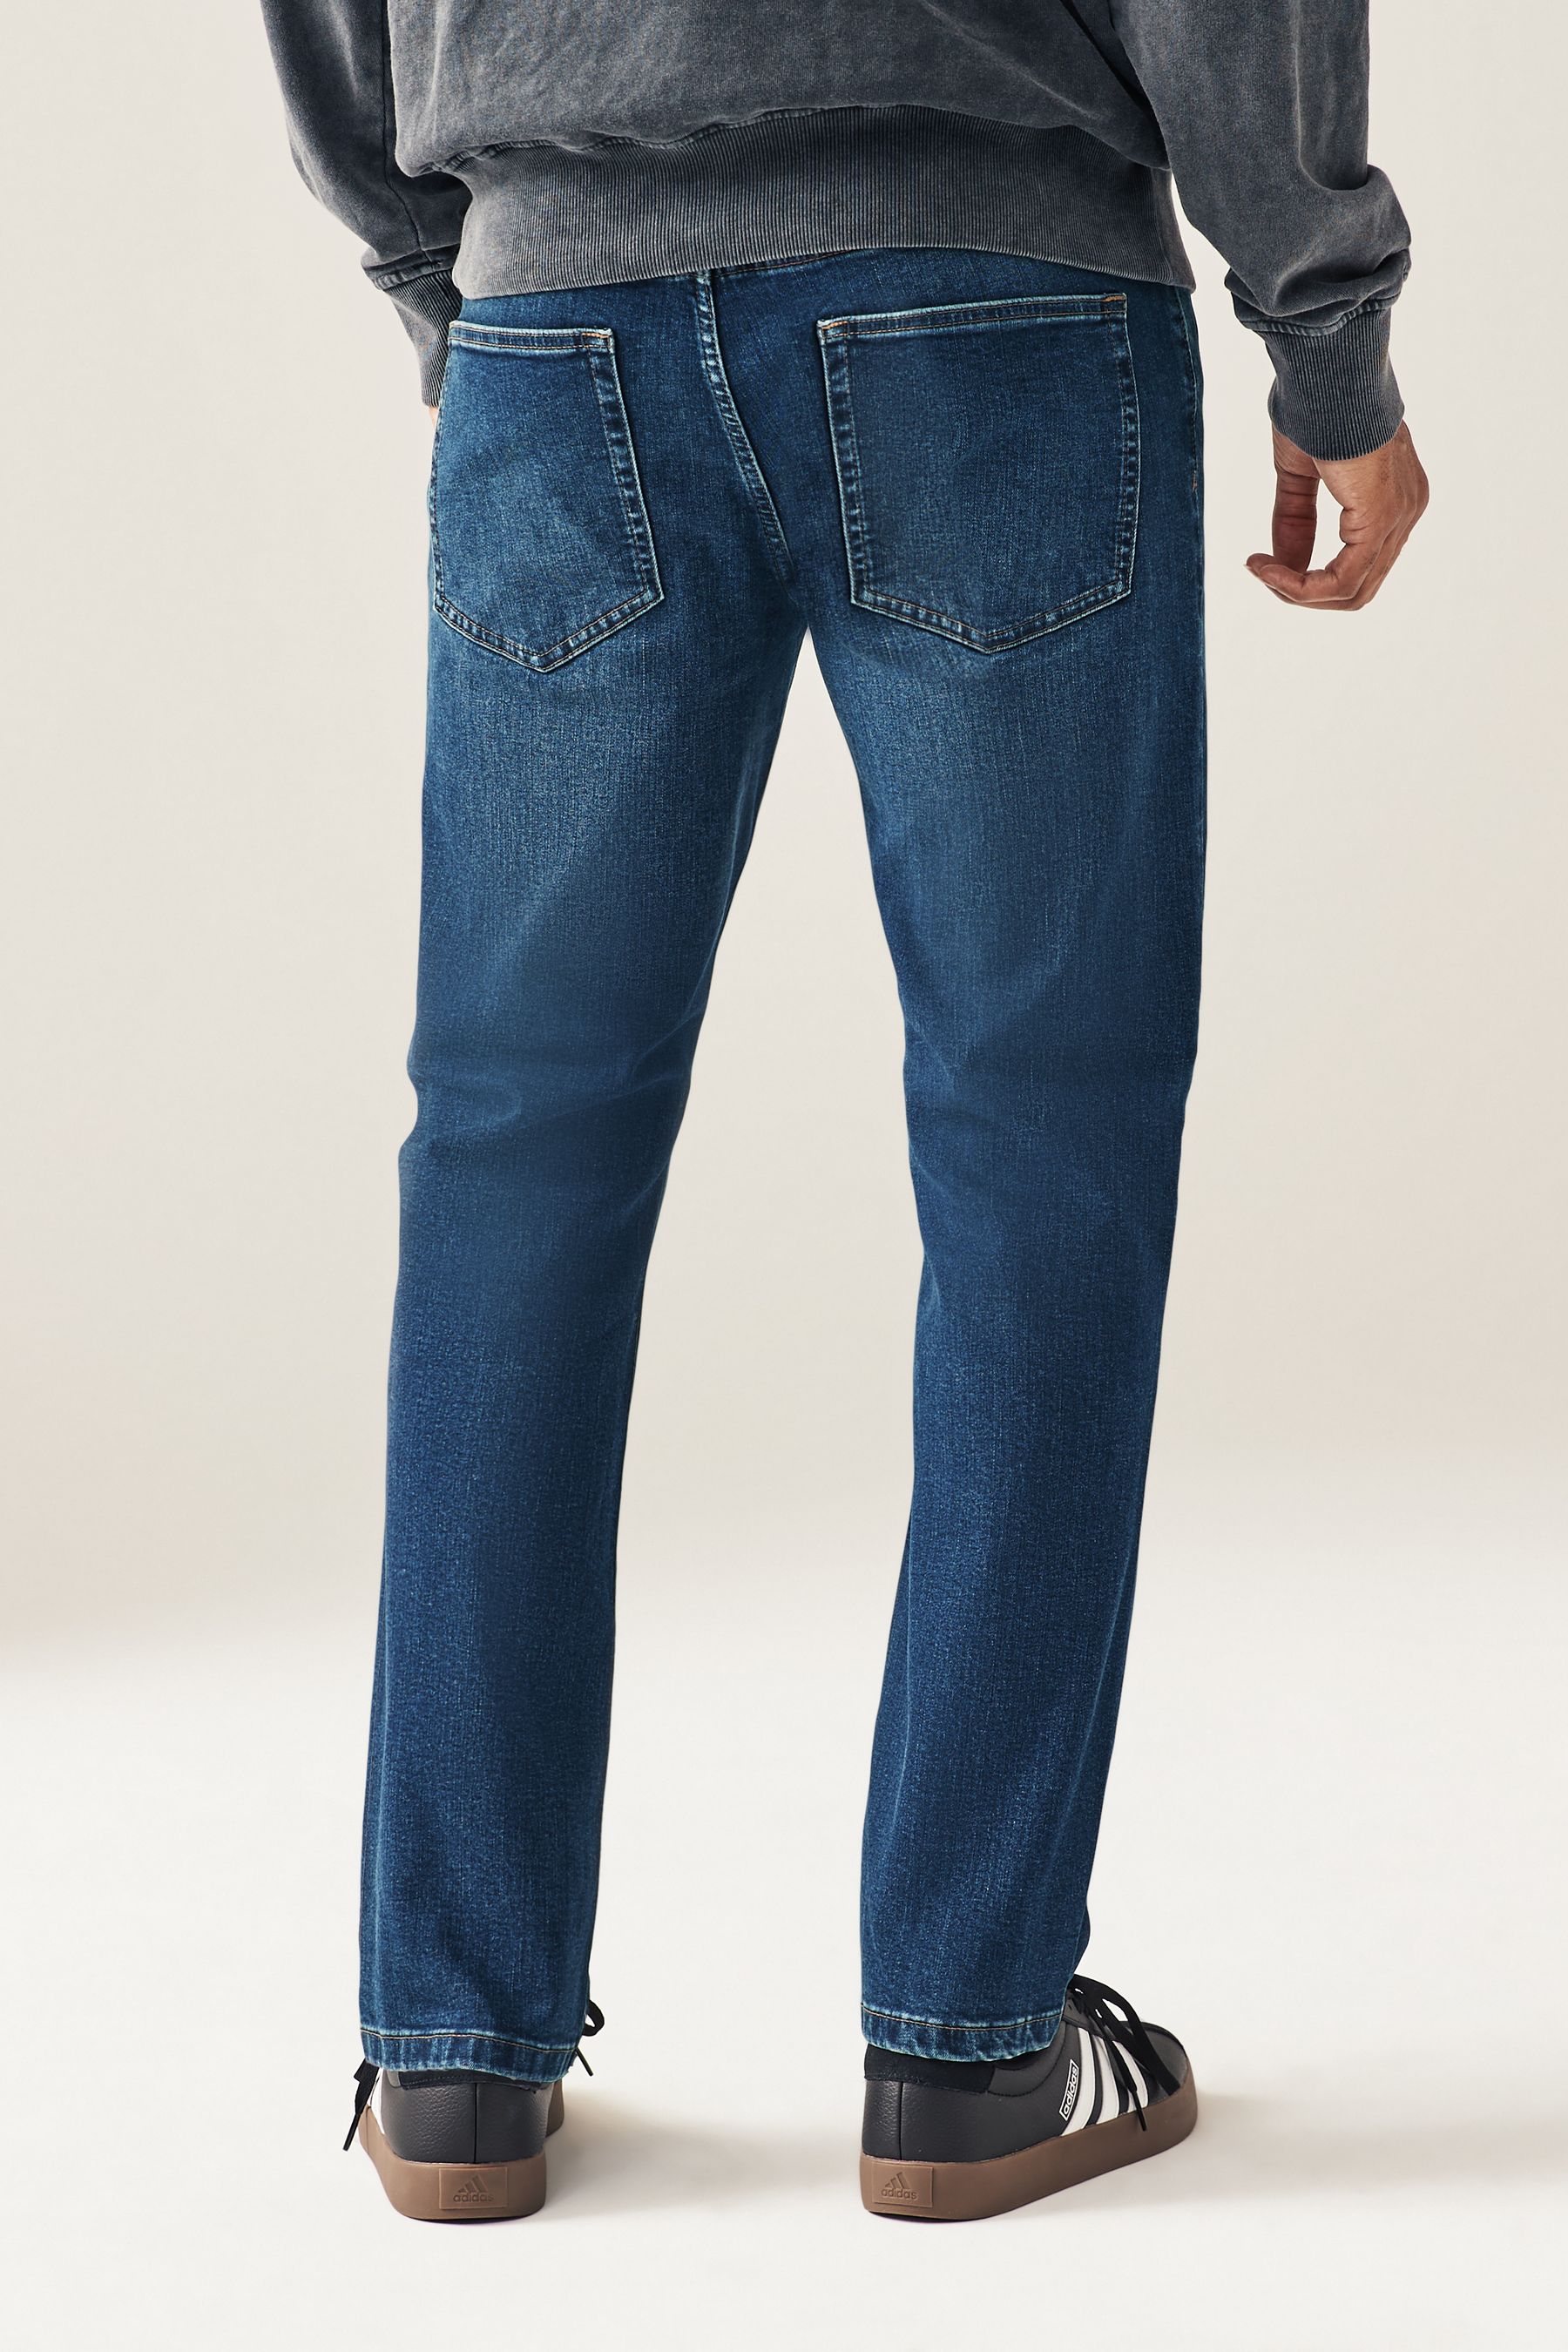 Buy Essential Stretch Jeans from the Next UK online shop